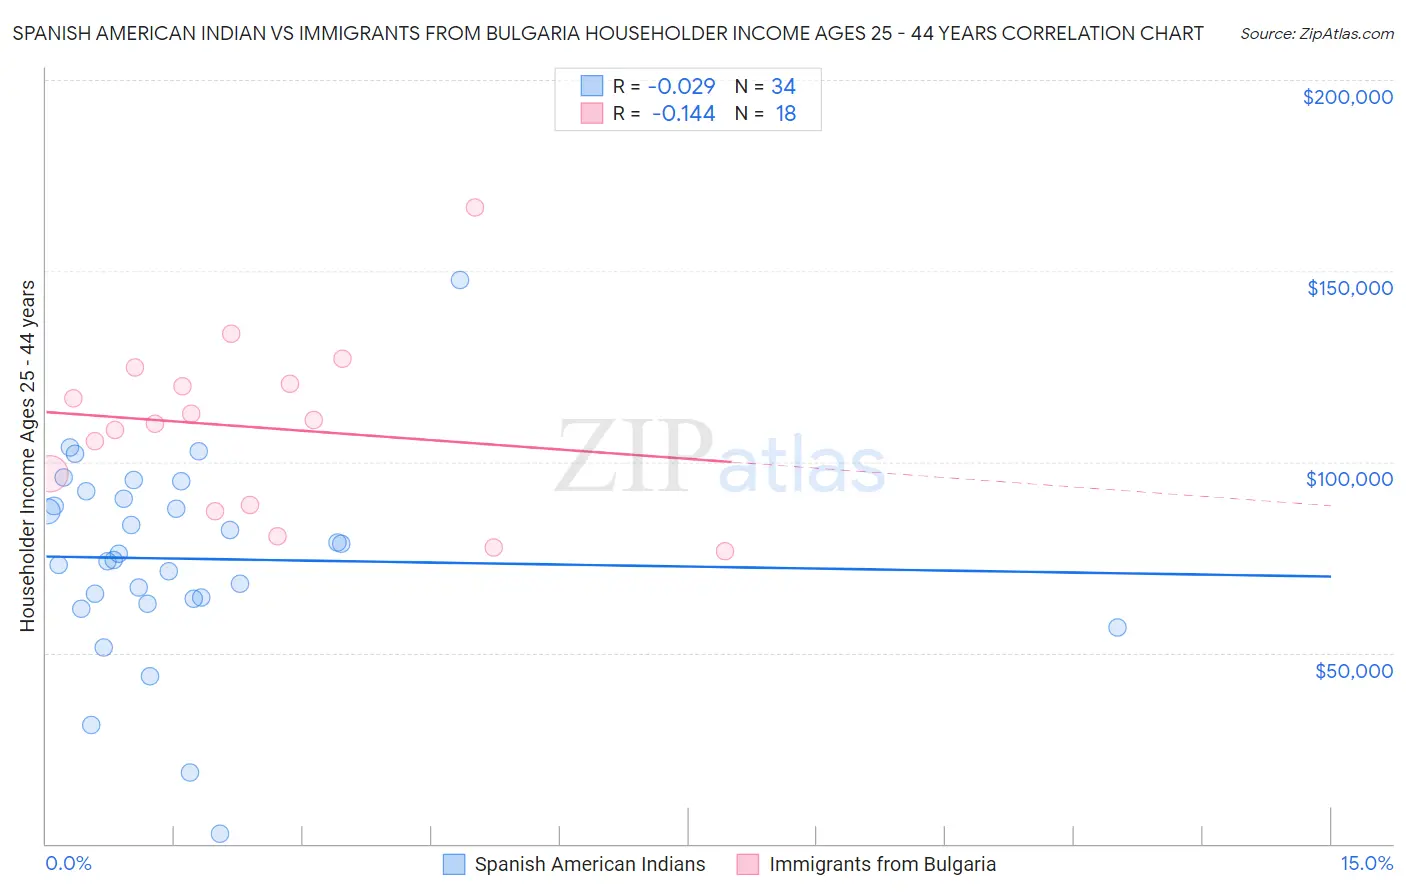 Spanish American Indian vs Immigrants from Bulgaria Householder Income Ages 25 - 44 years